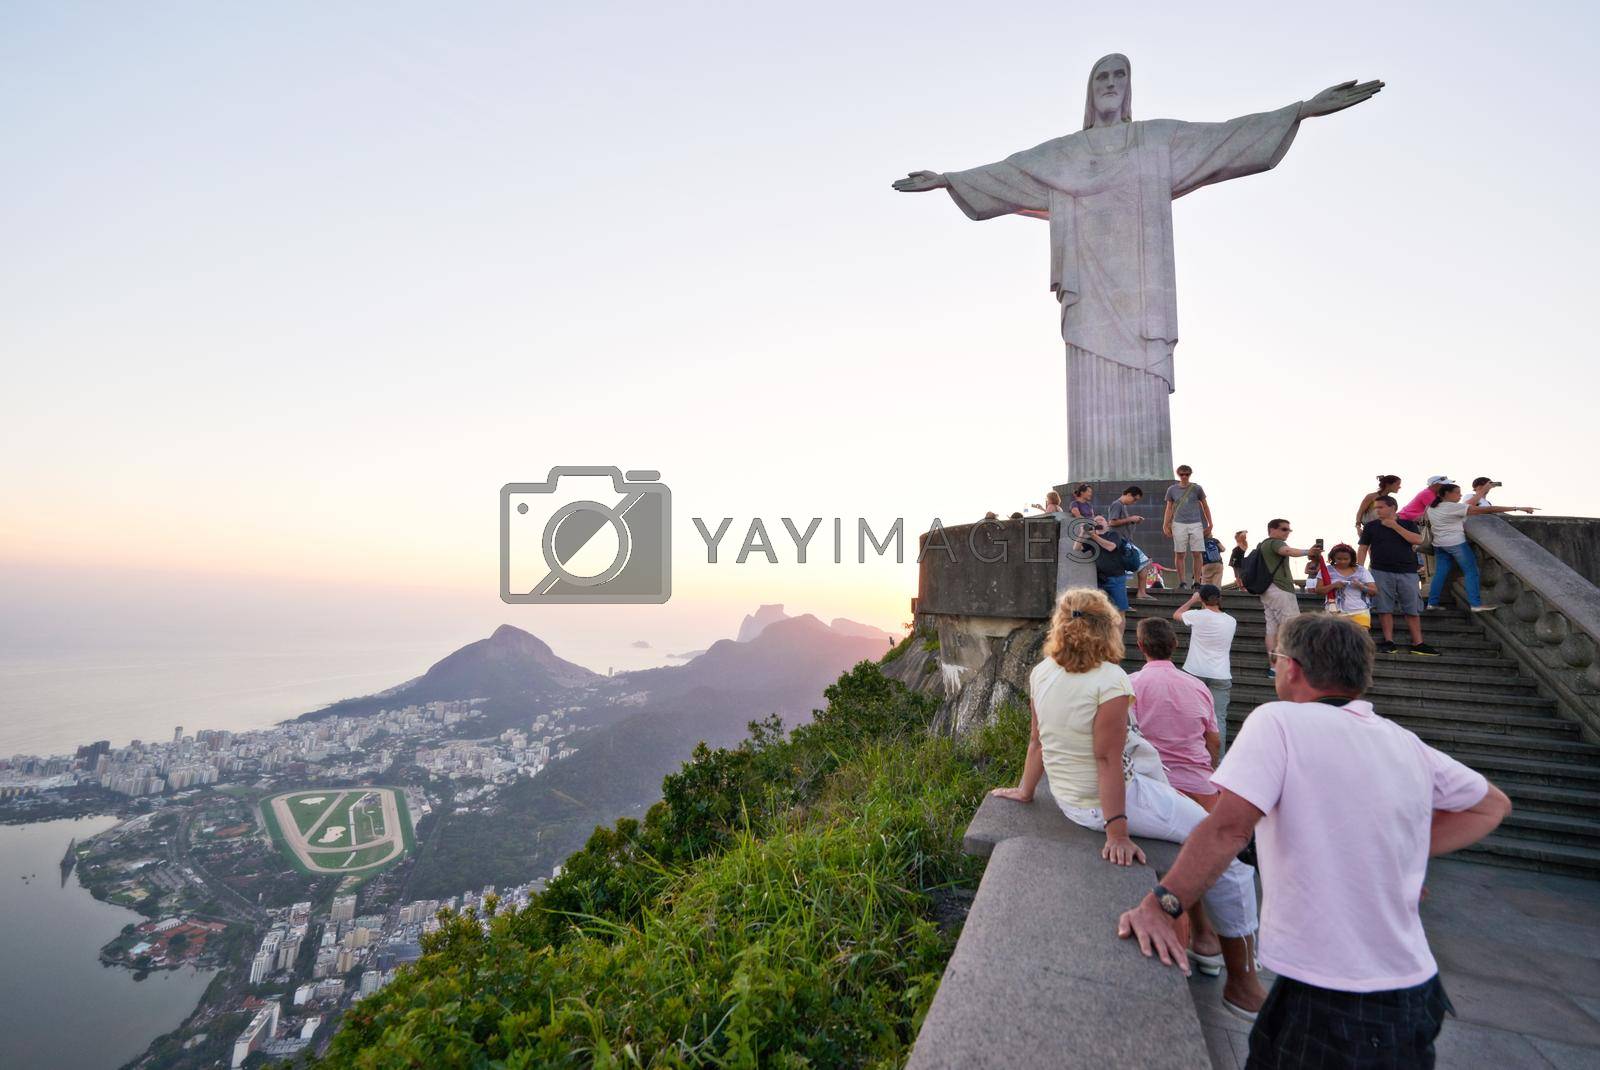 A group of tourists on the path to see the statue, Christ the Redeemer in Rio.